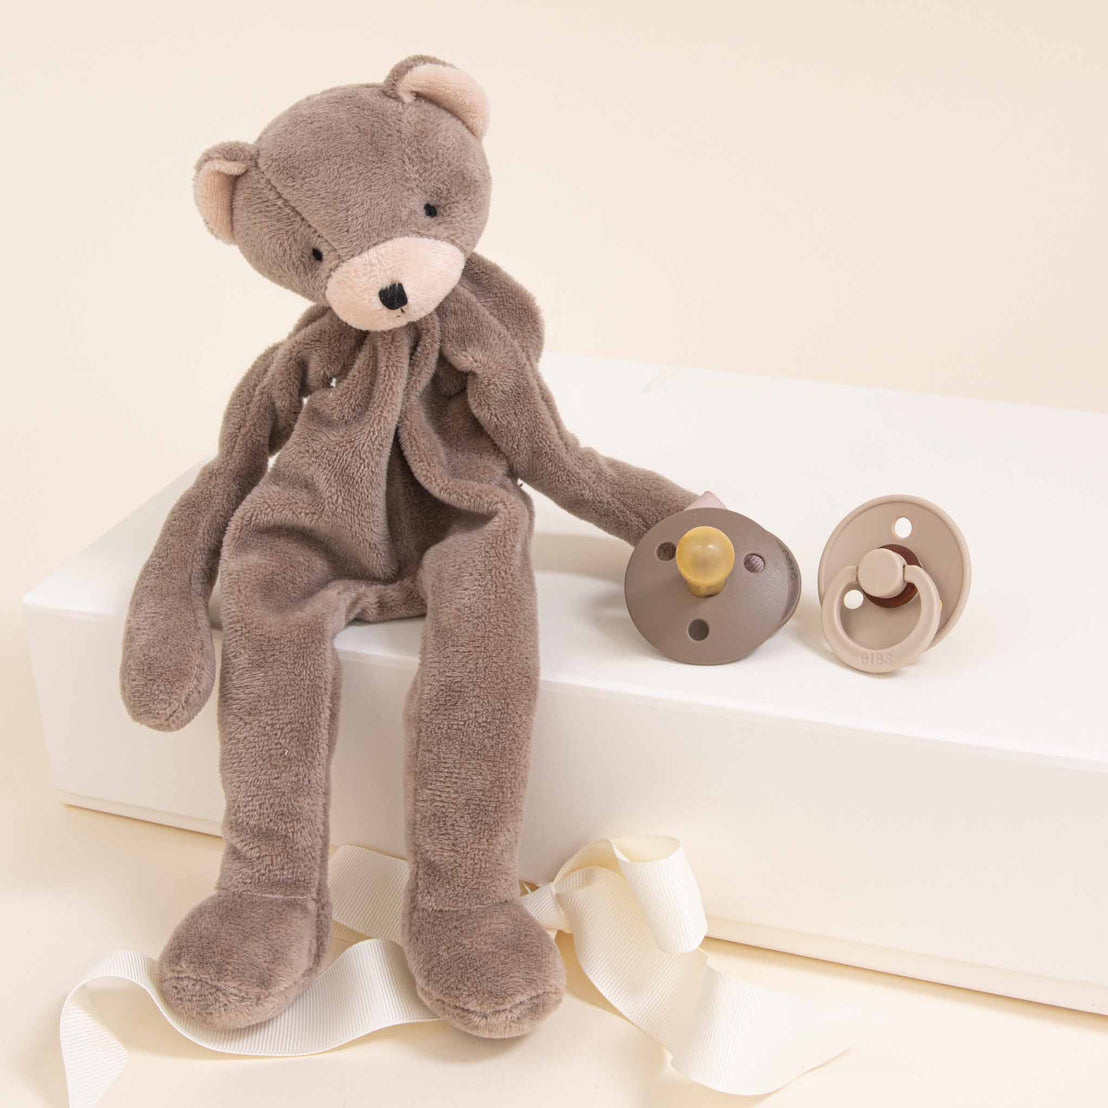 A plush Dylan teddy bear in a soft beige tone sits on a white block next to two pacifiers and a newborn outfit, one on a ribbon, against a creamy background.